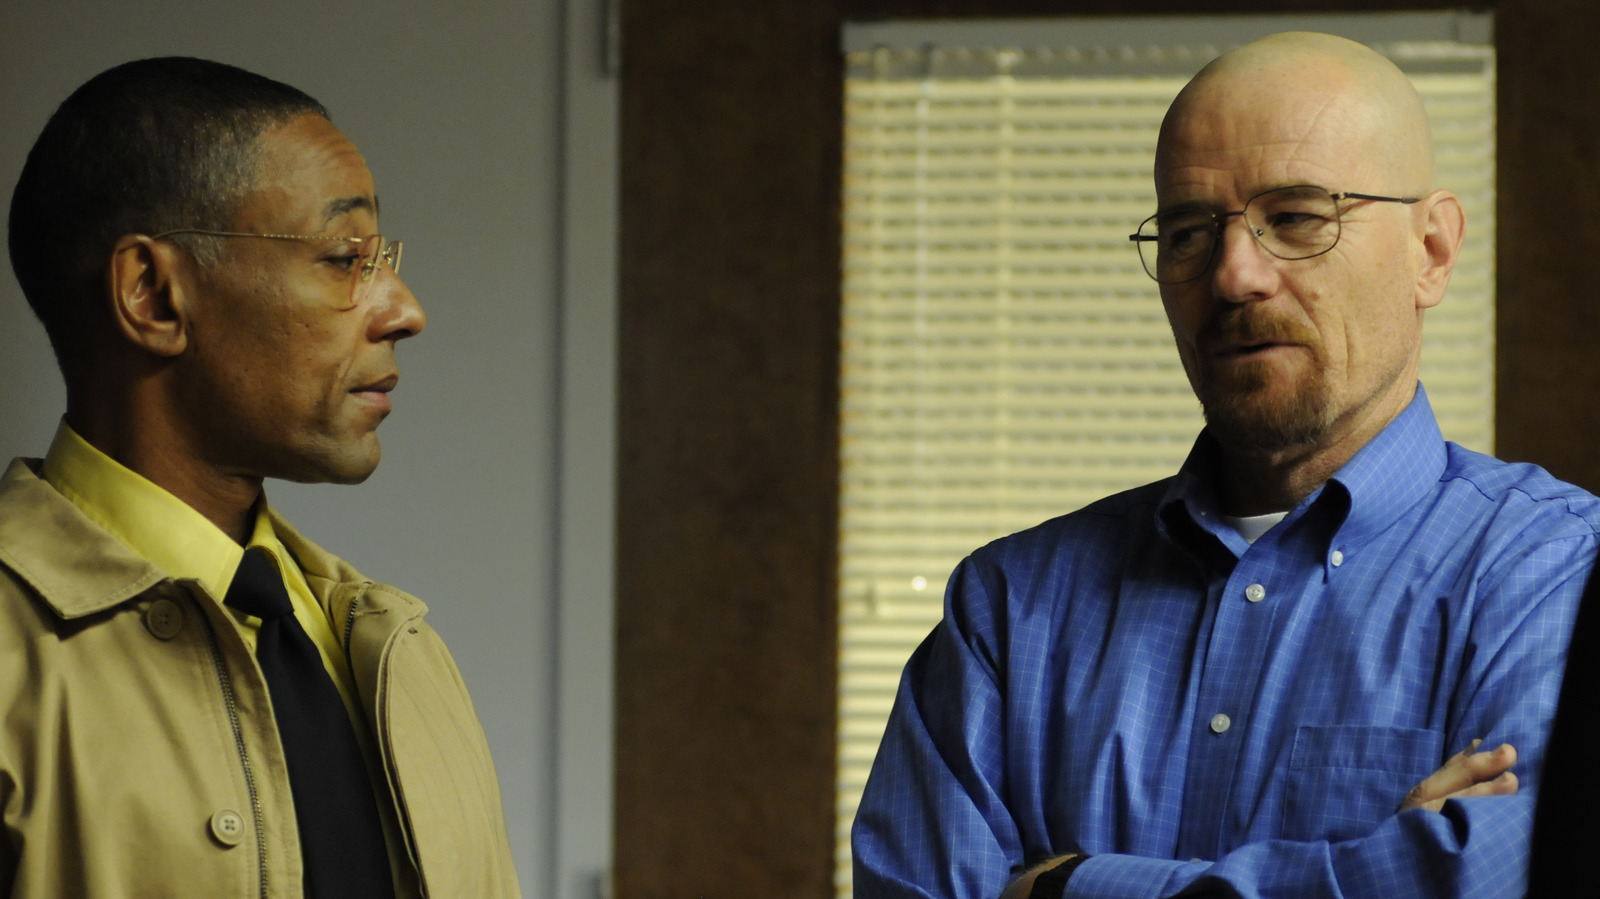 The Character Breaking Bad Fans Think Really Caused Walt And Gus' War.